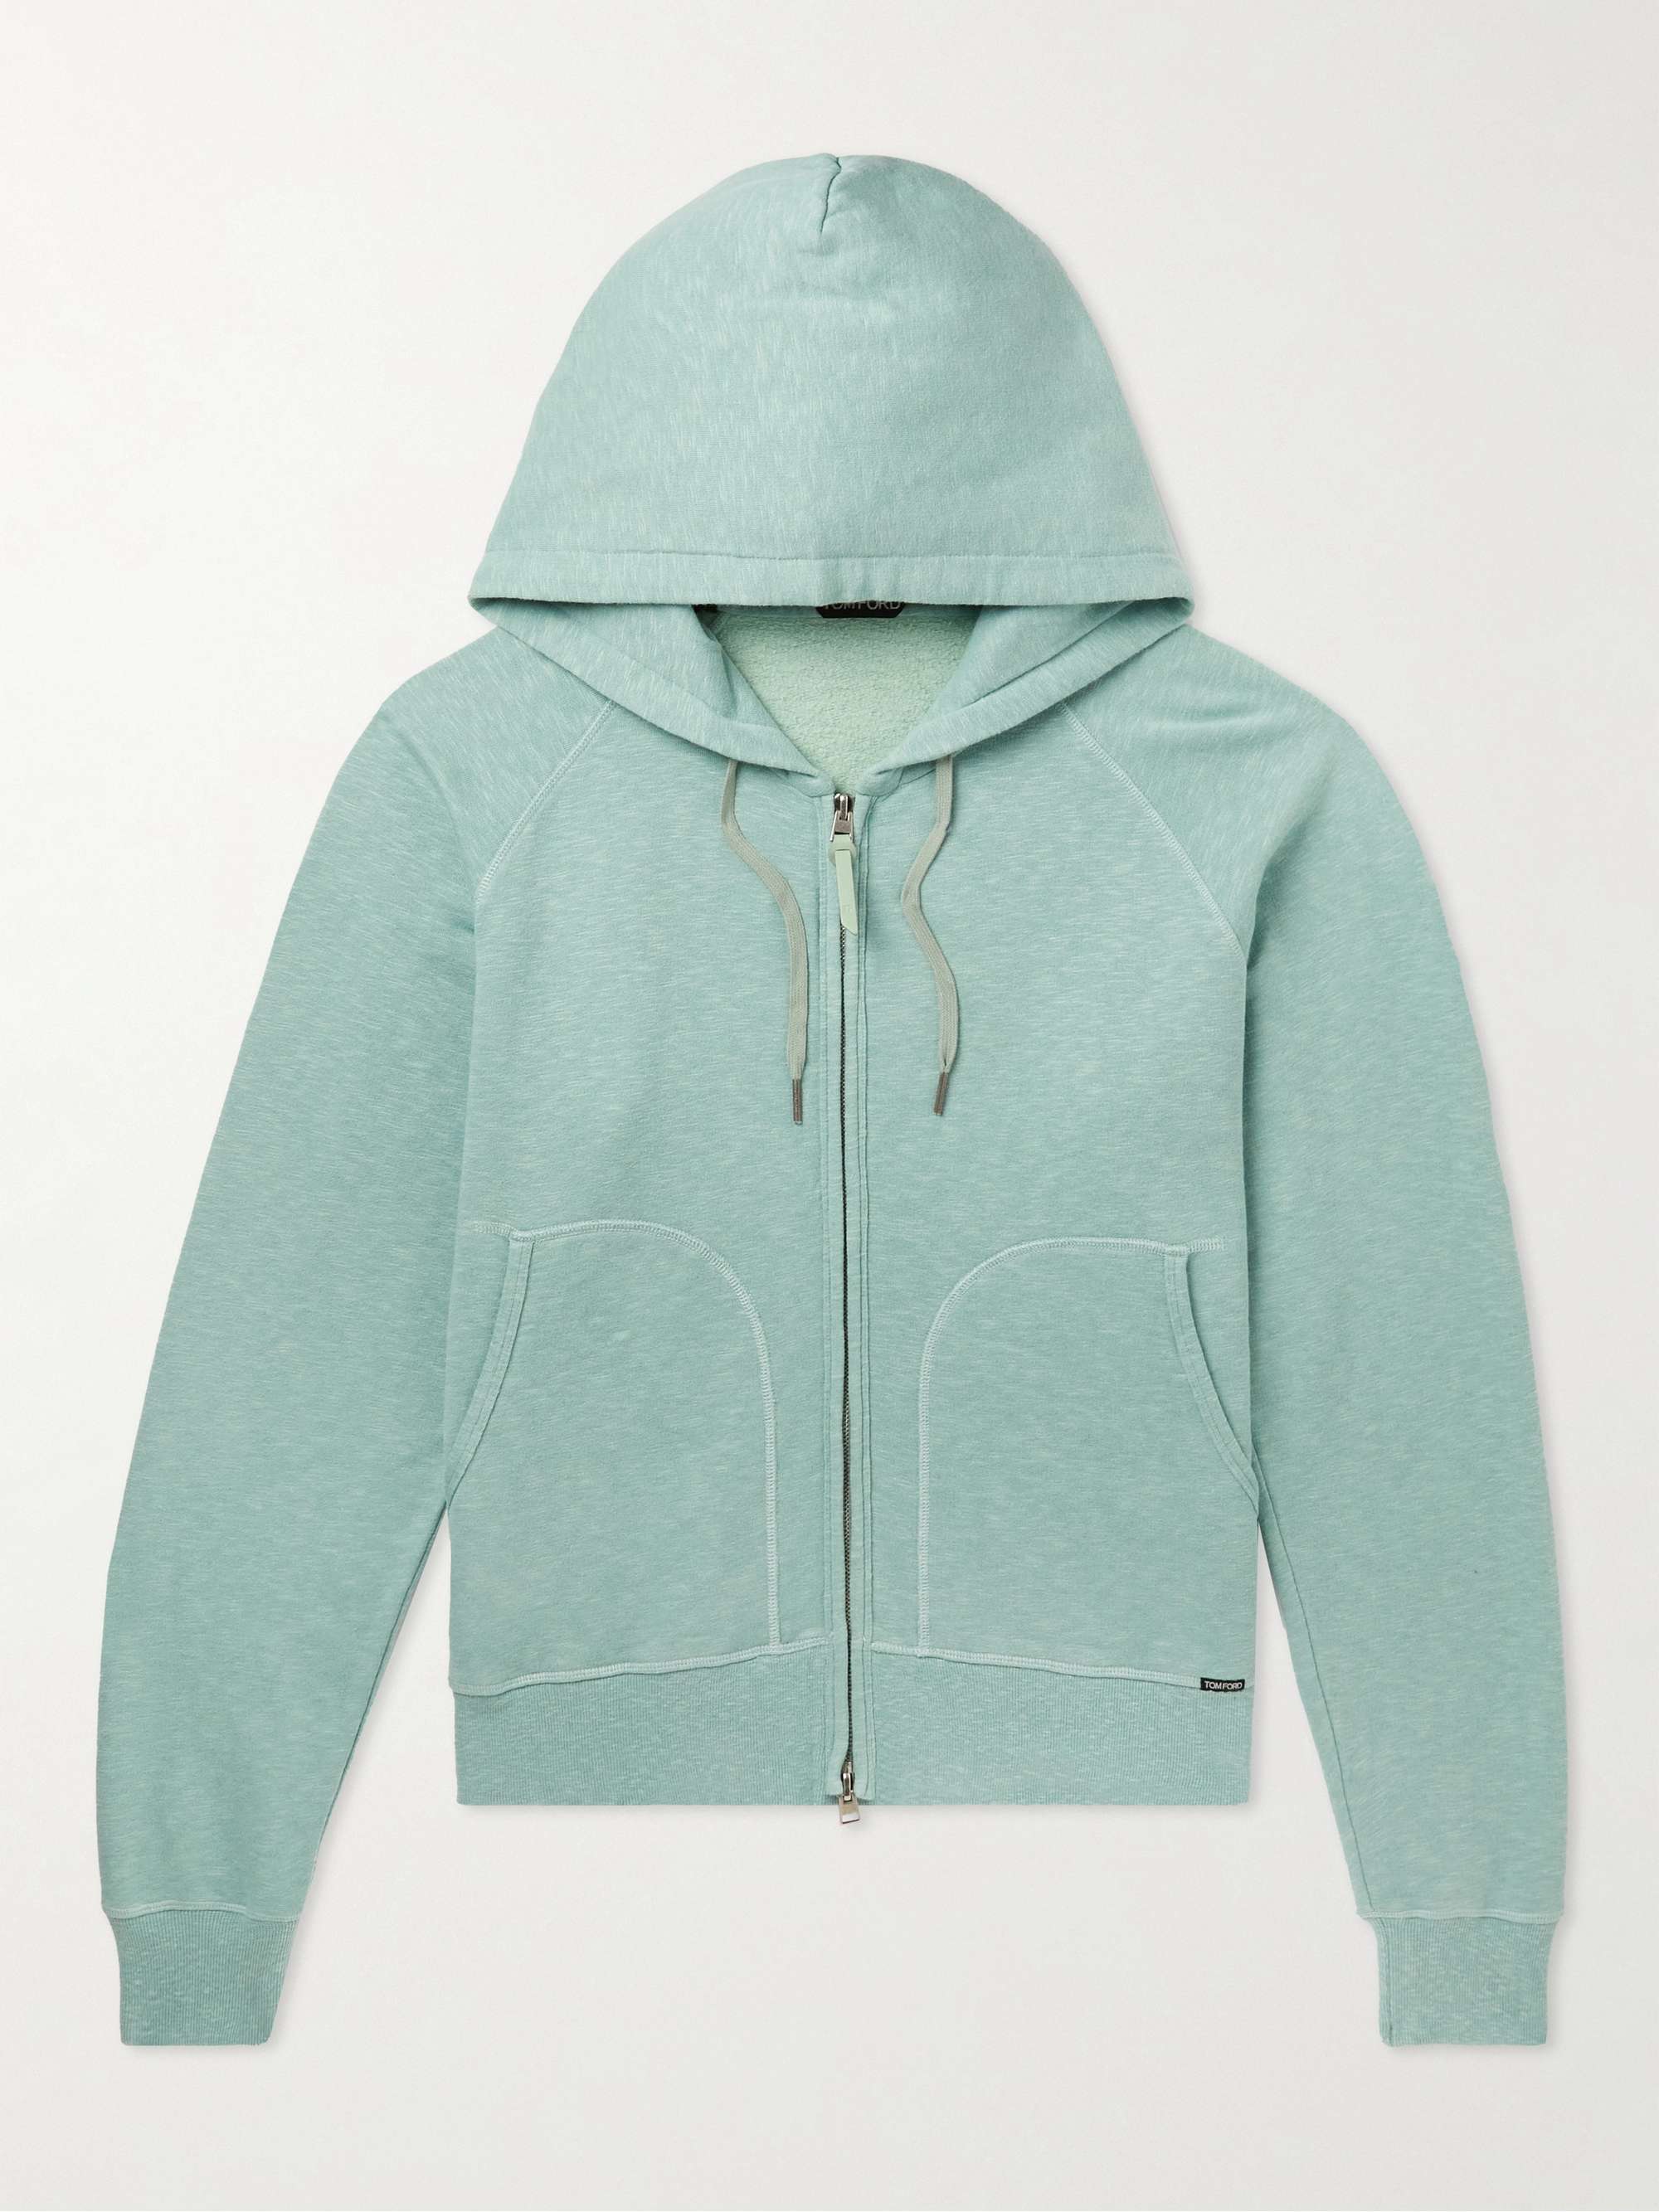 TOM FORD Brushed Cotton-Blend Jersey Zip-Up Hoodie